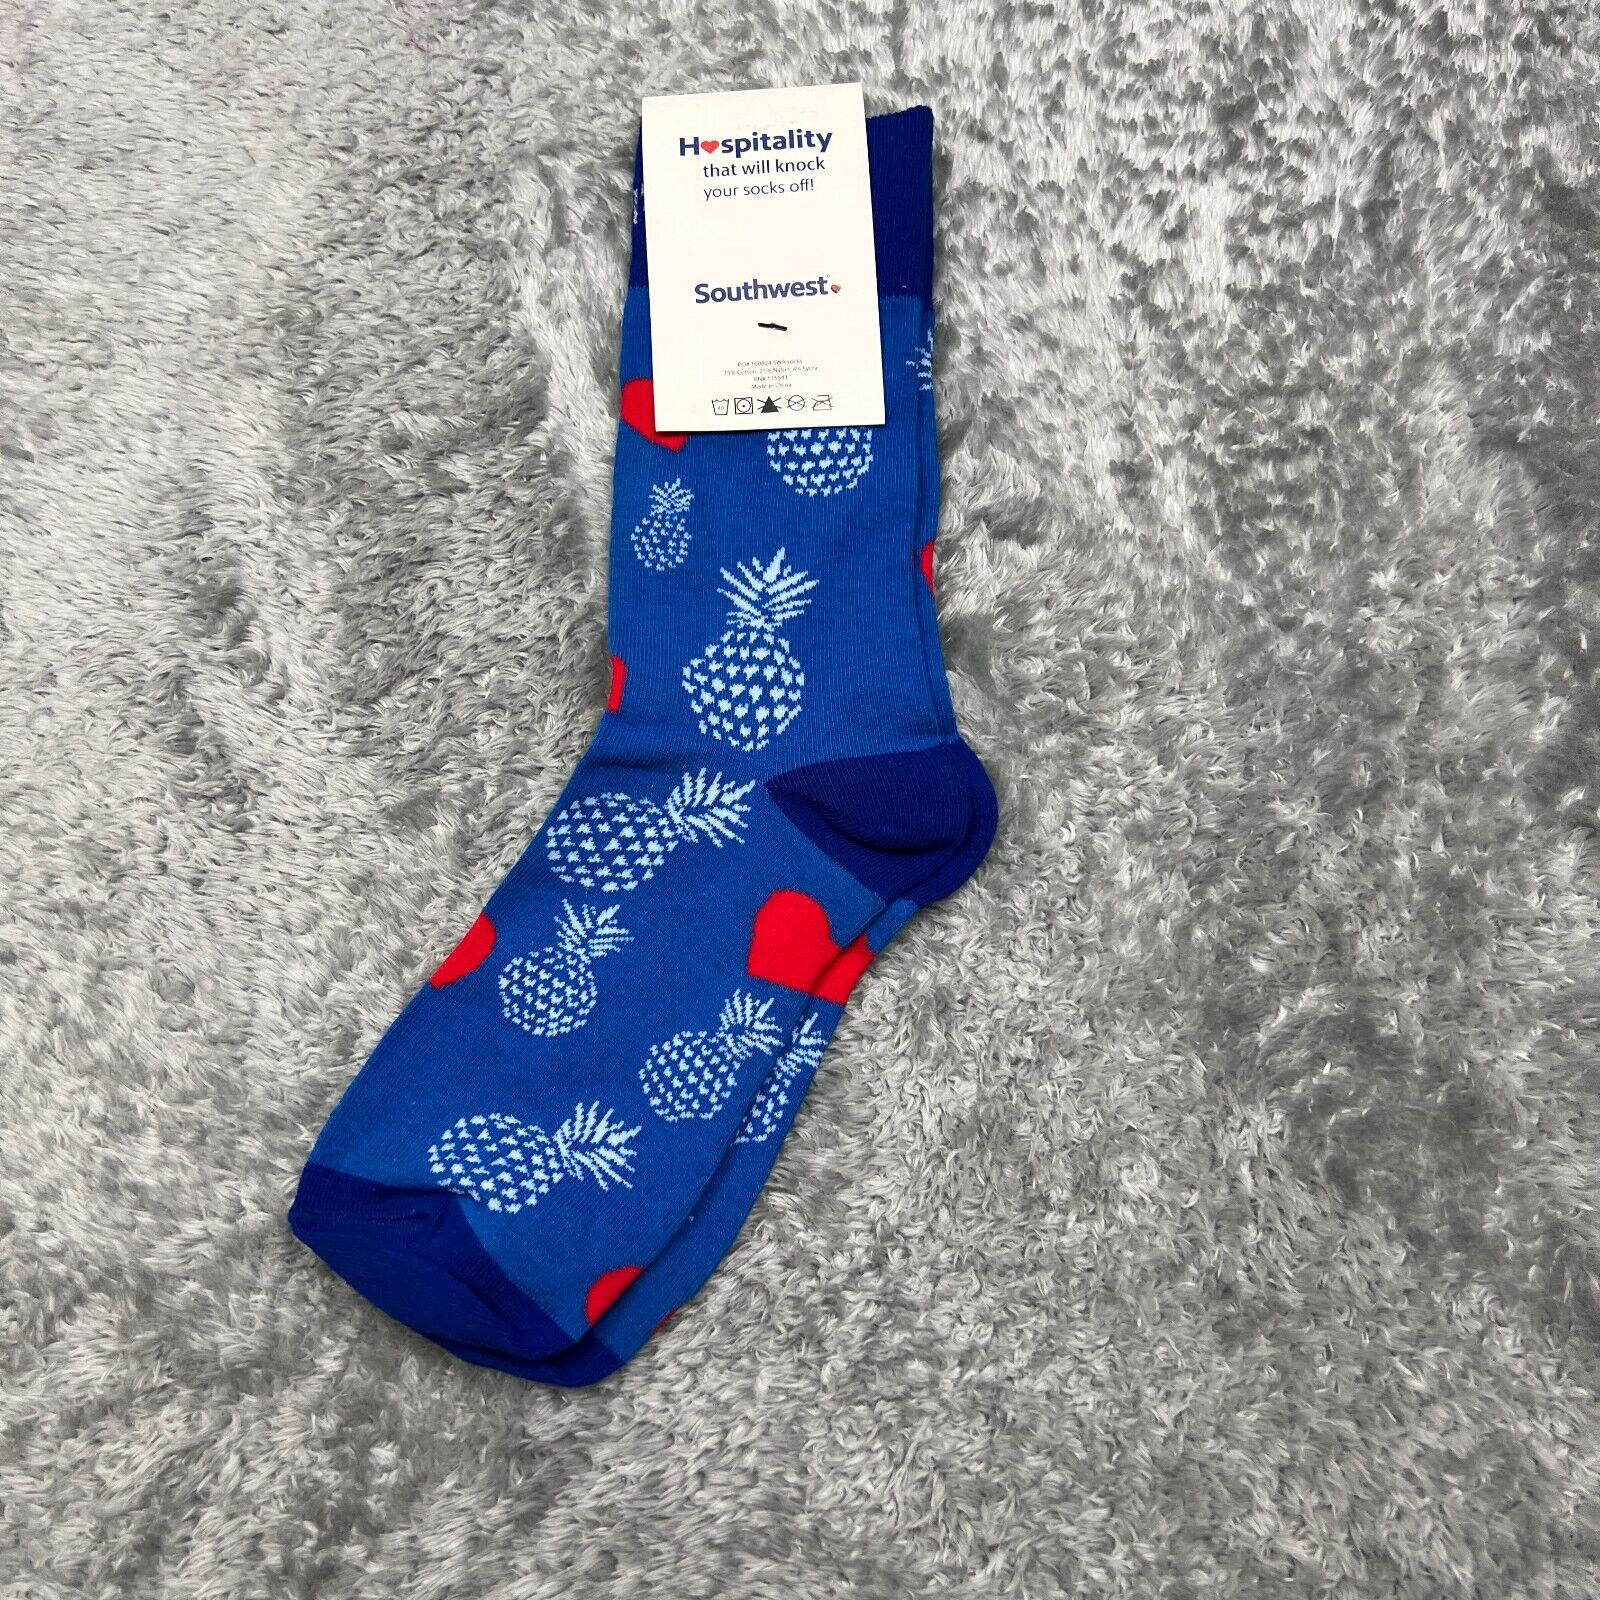 Southwest Airlines Socks Pineapple Blue Red White by Hospitality